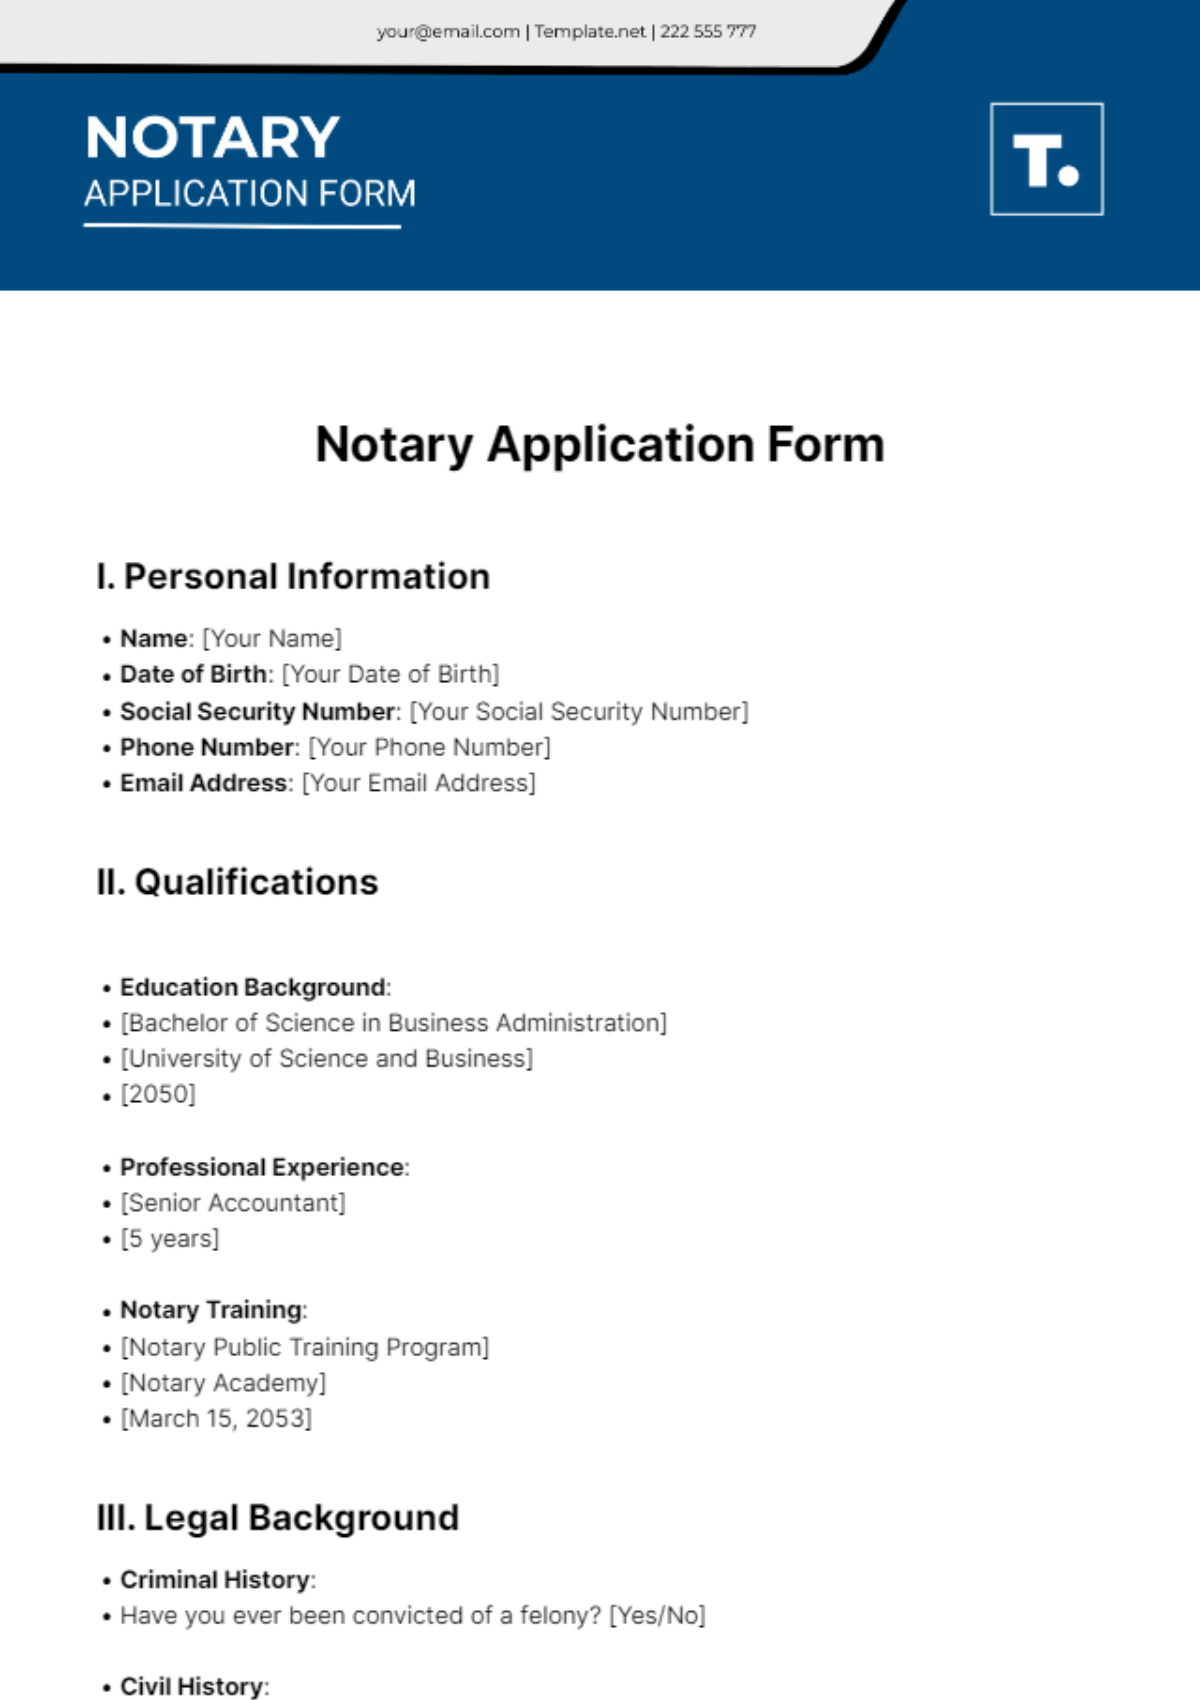 Notary Application Form Template